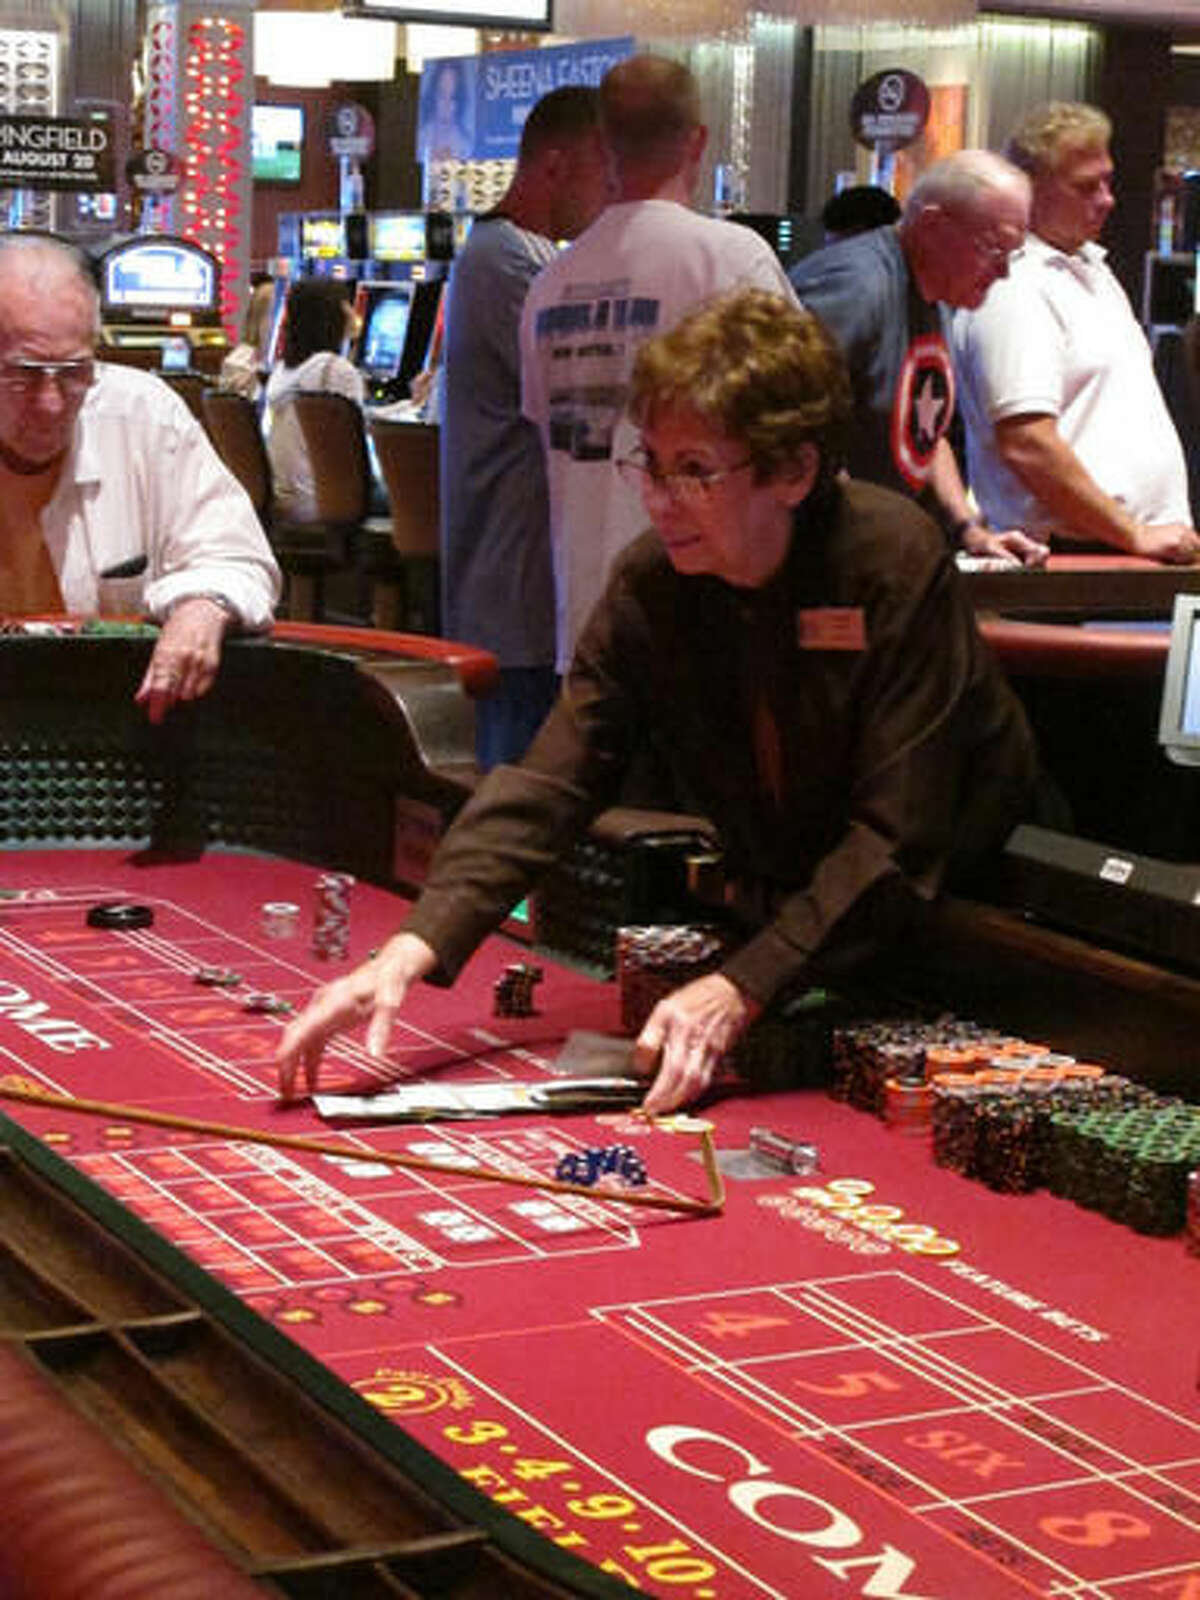 This June 24, 2016 photo shows a dealer conducting a craps game at the Golden Nugget casino in Atlantic City, N.J., where gambling revenue was up 6.4 percent in August to $23.8 million. Figures released by New Jersey gambling regulators on Wednesday Sept. 14 show that Atlantic City's eight casinos saw a collective decline of 4.9 percent in their August 2016 gambling revenue to $245.8 million compared with August 2015. (AP Photo/Wayne Parry)